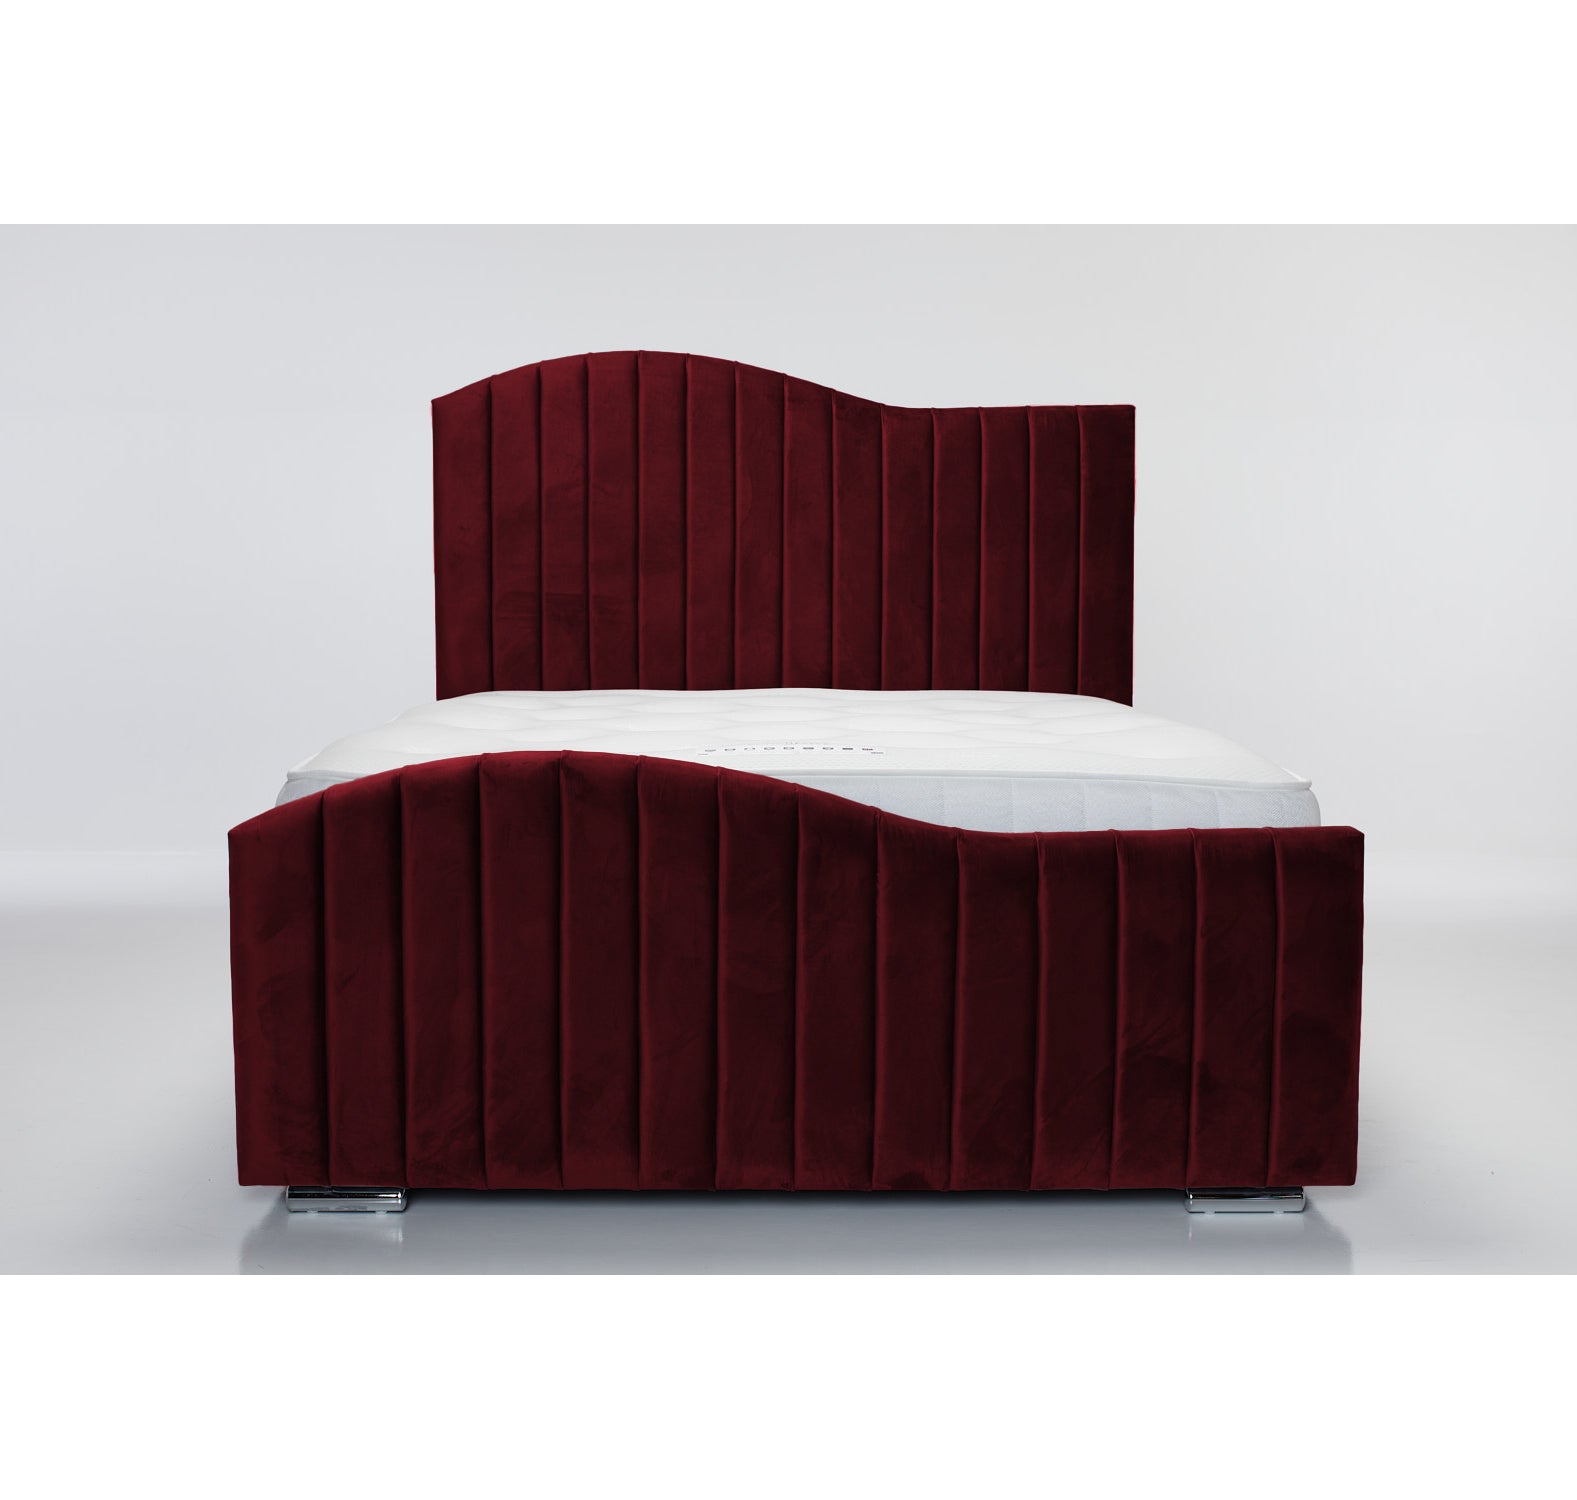 Luxury Duke Upholstered Bed Frame with Ottoman Storage Options Britainsleep